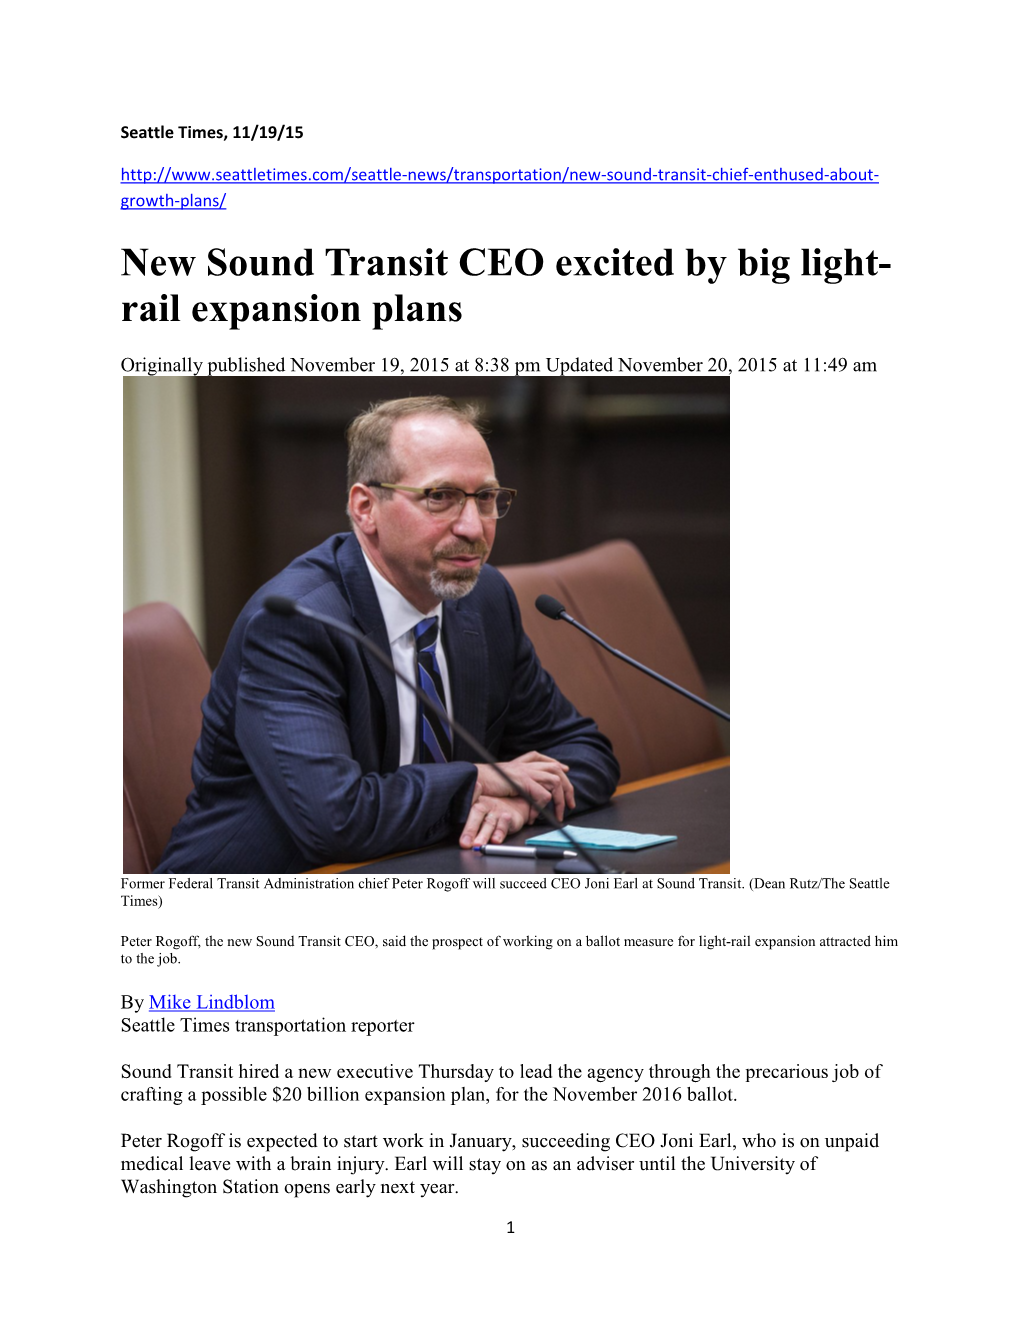 New Sound Transit CEO Excited by Big Light- Rail Expansion Plans